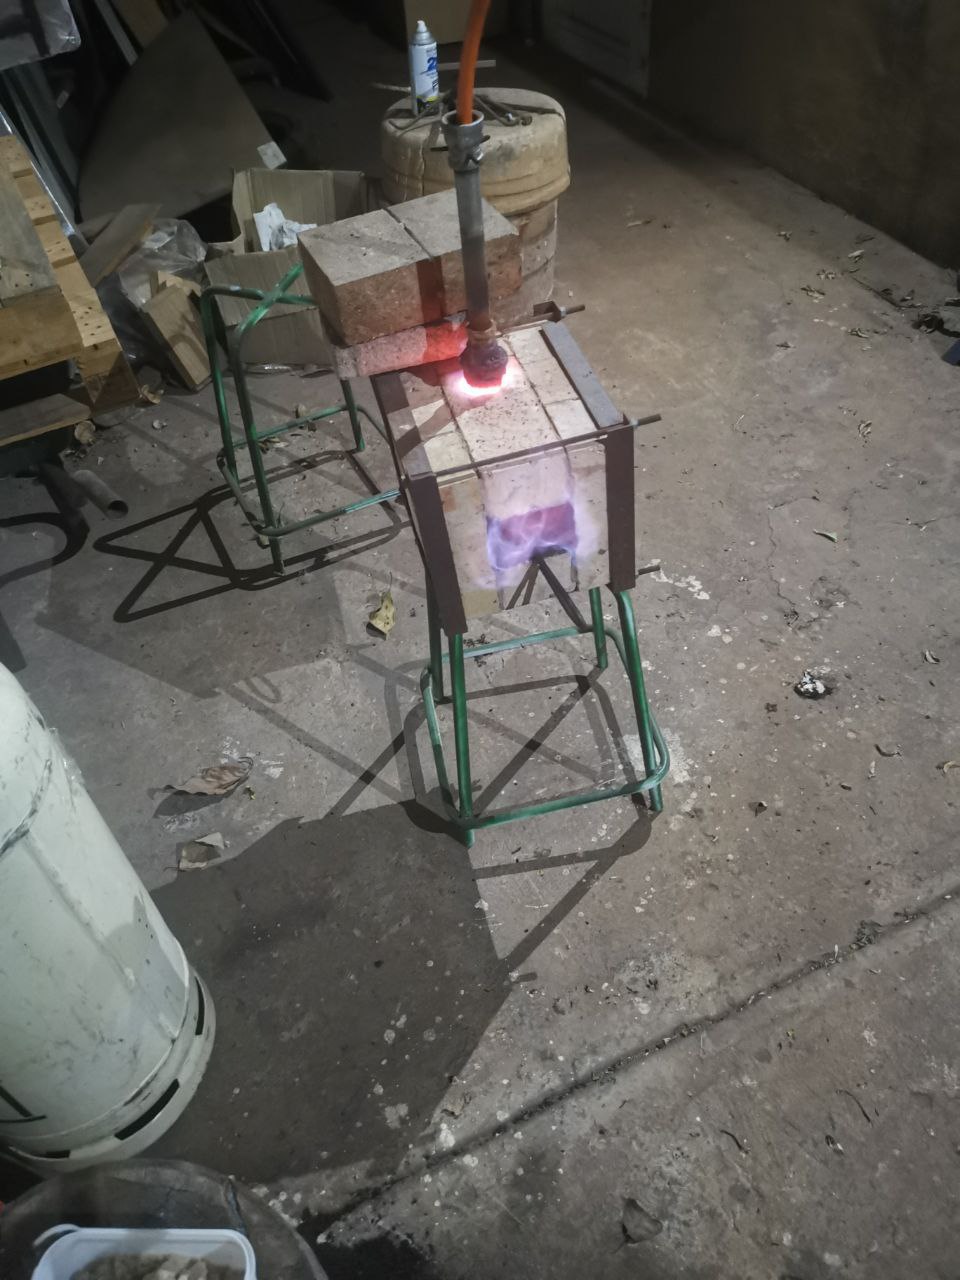 Our forge, busy melting brass